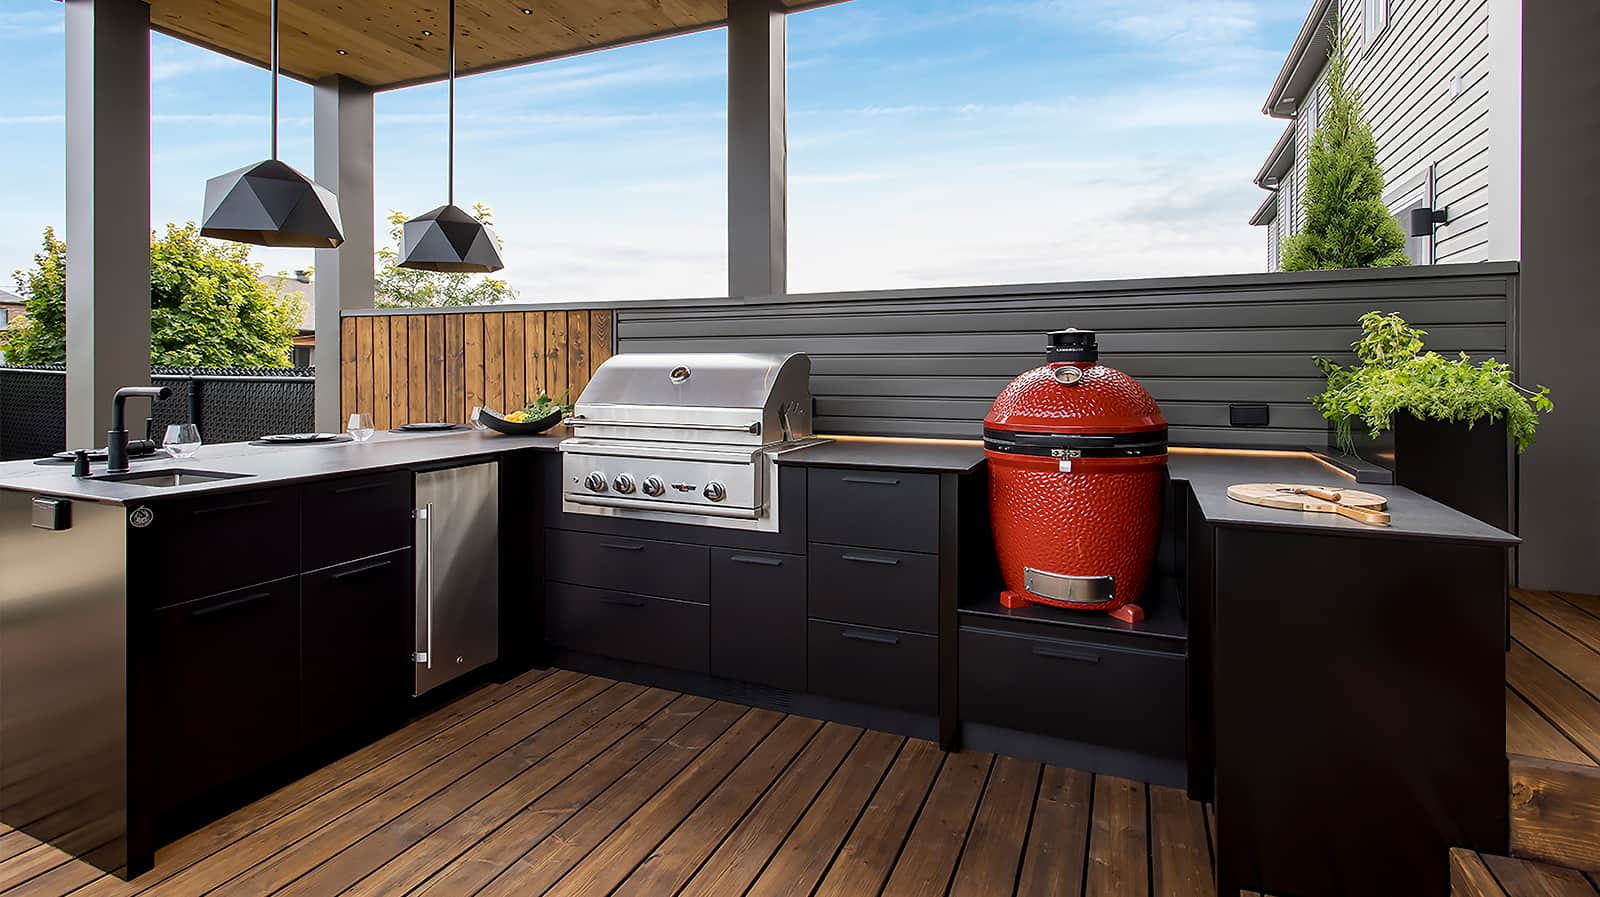 Polyethylene outdoor kitchen cabinet by Station Grill